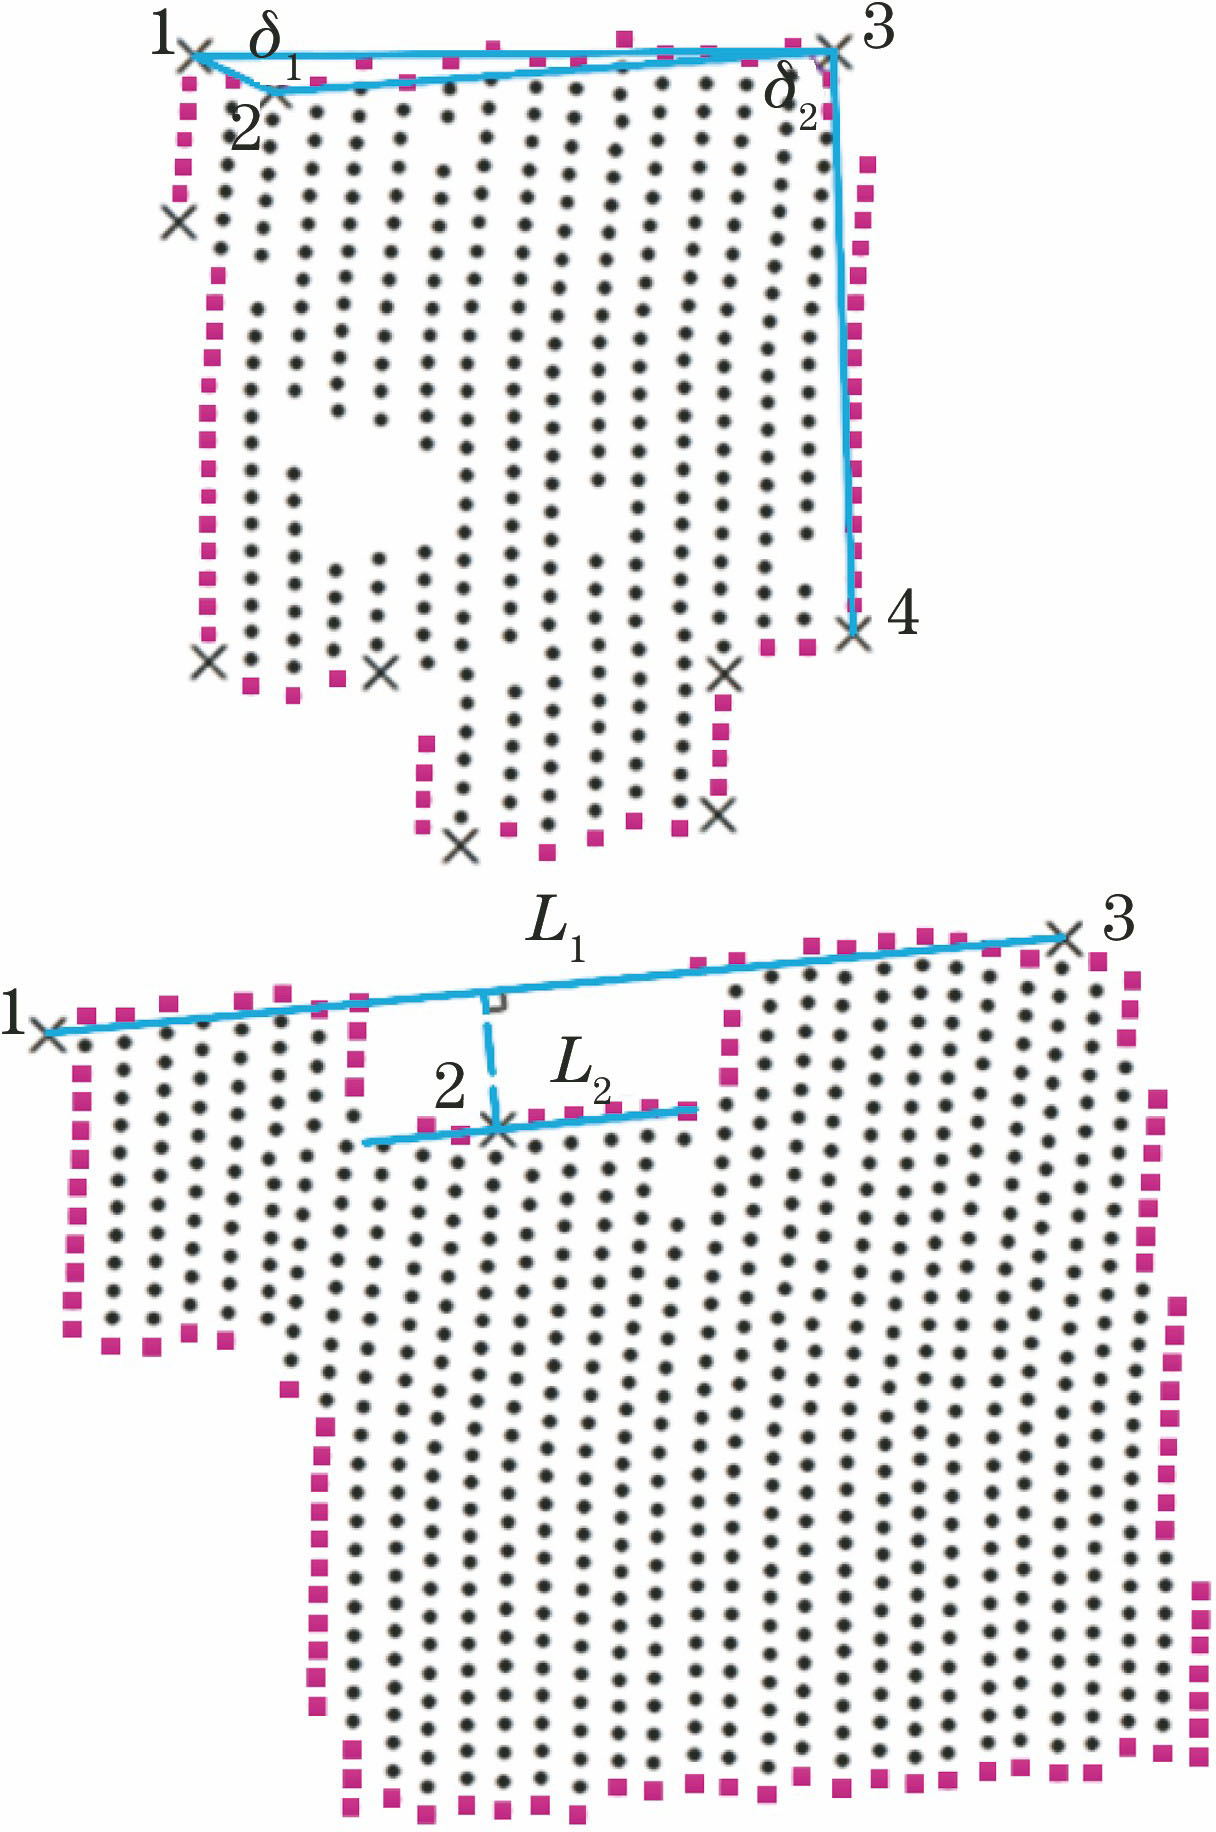 Limitation of improved Douglas_Peucker. (a) Limitation because of points density; (b) limitation because of parallel